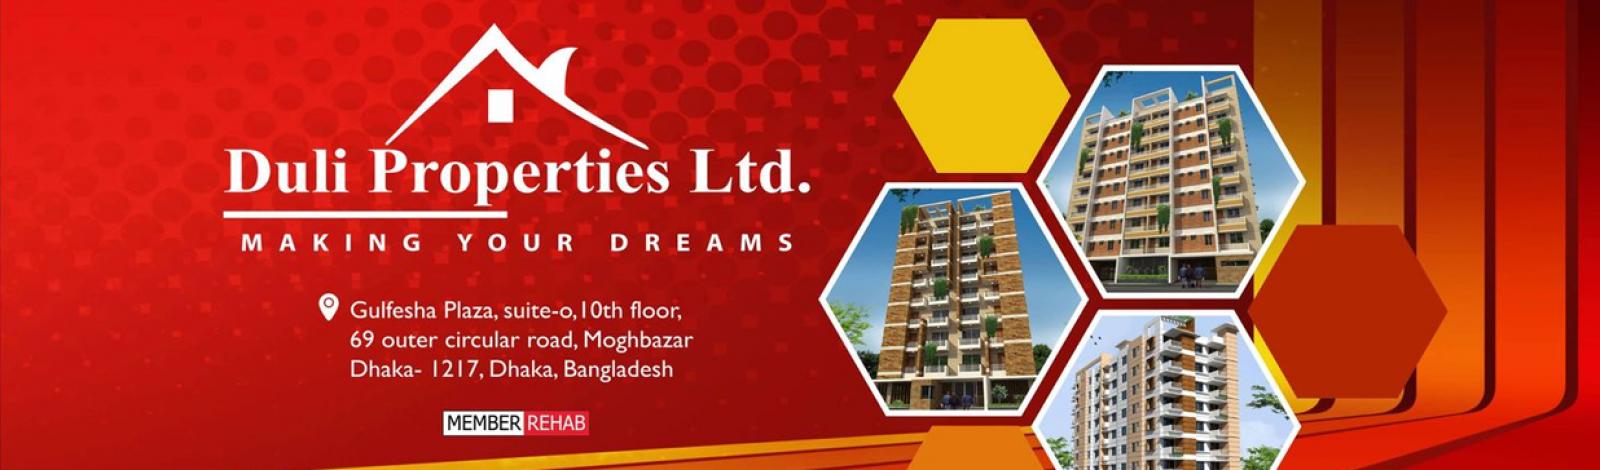 Duli Properties Limited banner